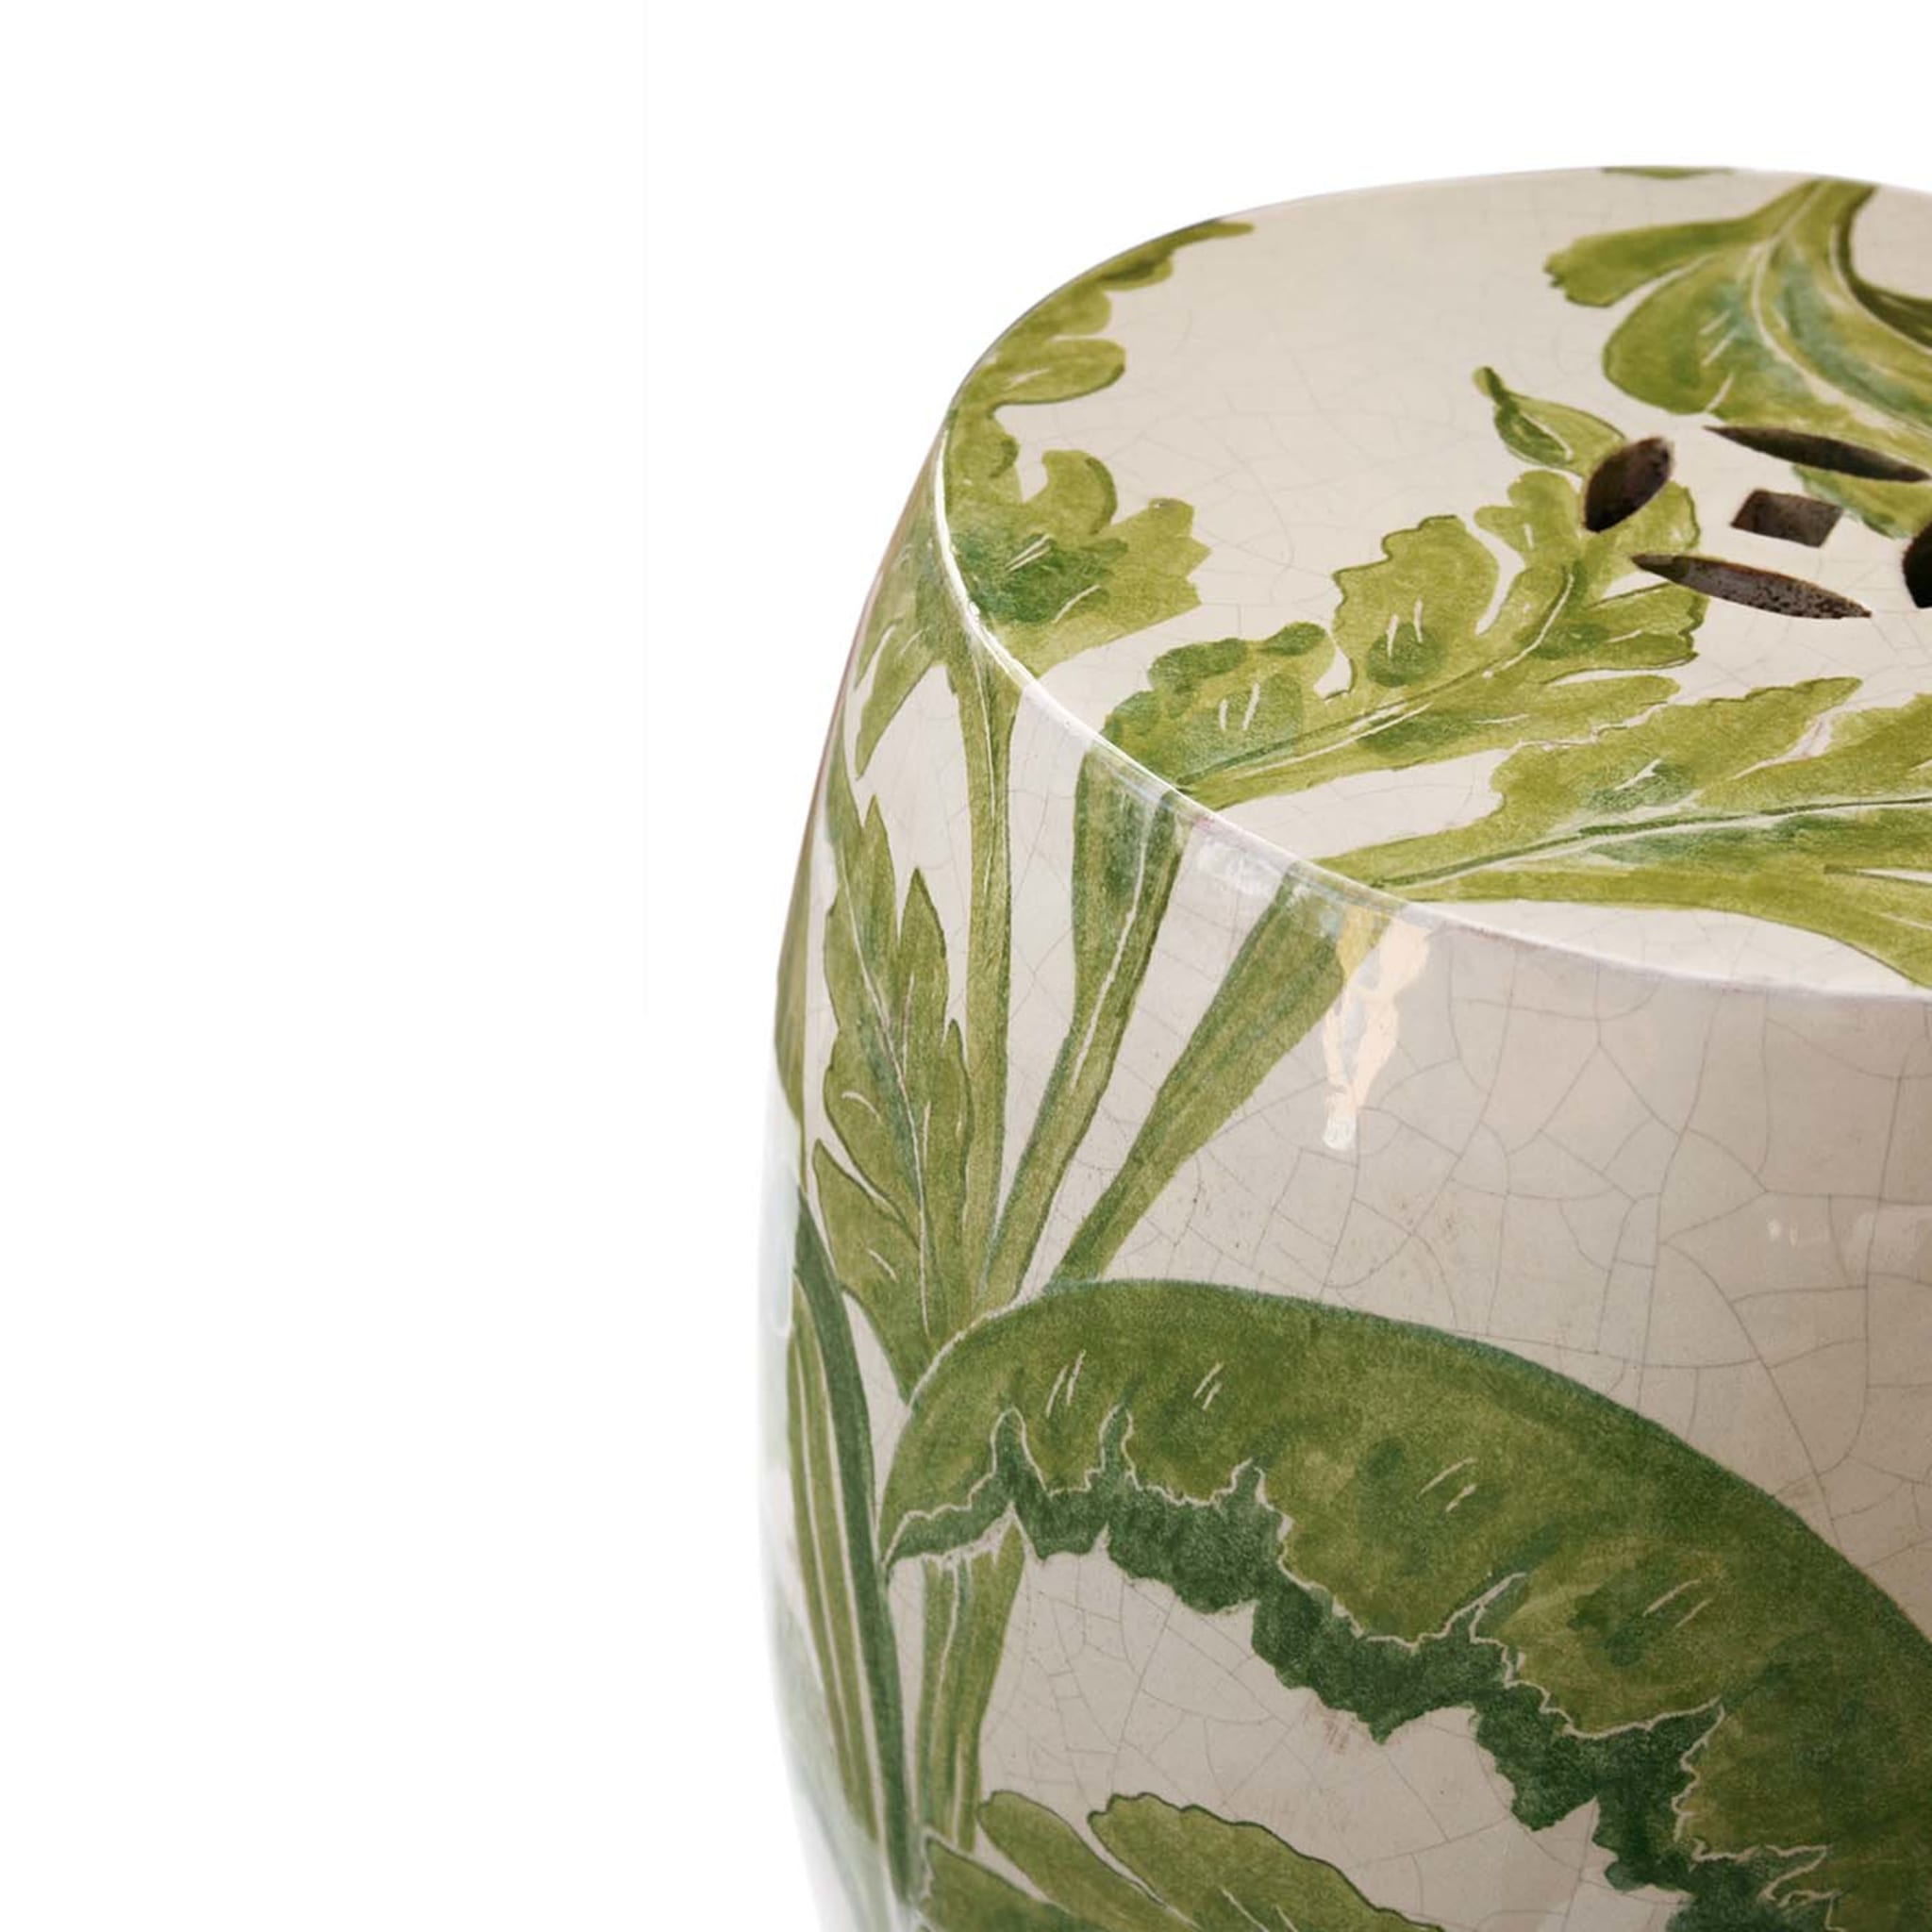 Banana Tree Leaves Ceramic Pouf with Fretworks - Alternative view 1